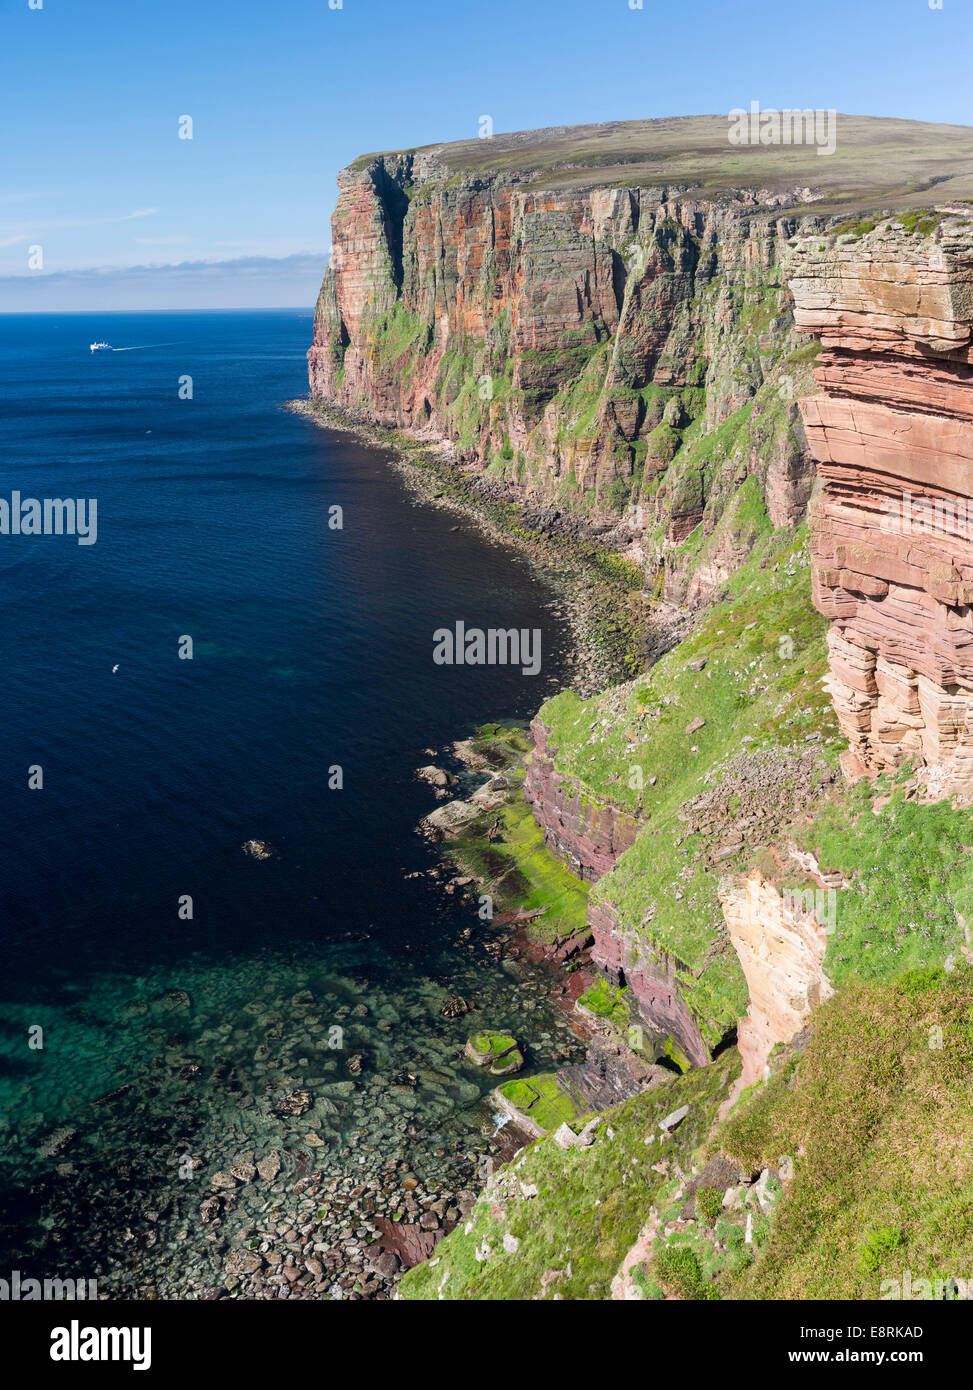 The cliffs of Hoy island near the Old Man of Hoy, View of the Brae Brough Cliffs and St Johns Head, Orkney islands, Scotland. Stock Photo